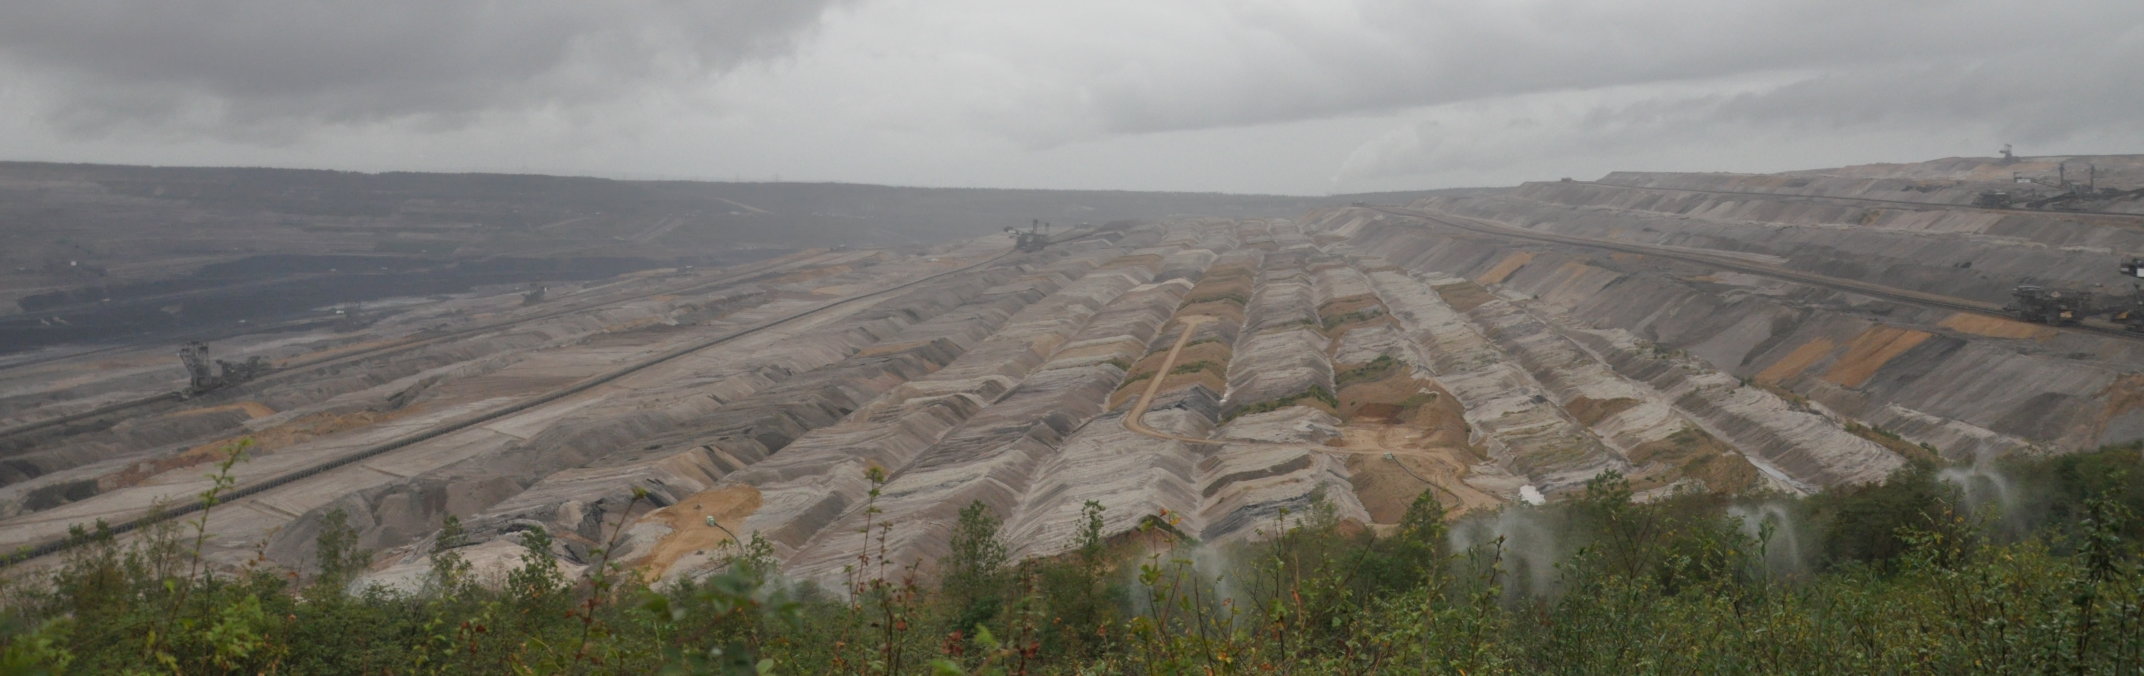 A partial panorama of the Hambach lignite surface mine